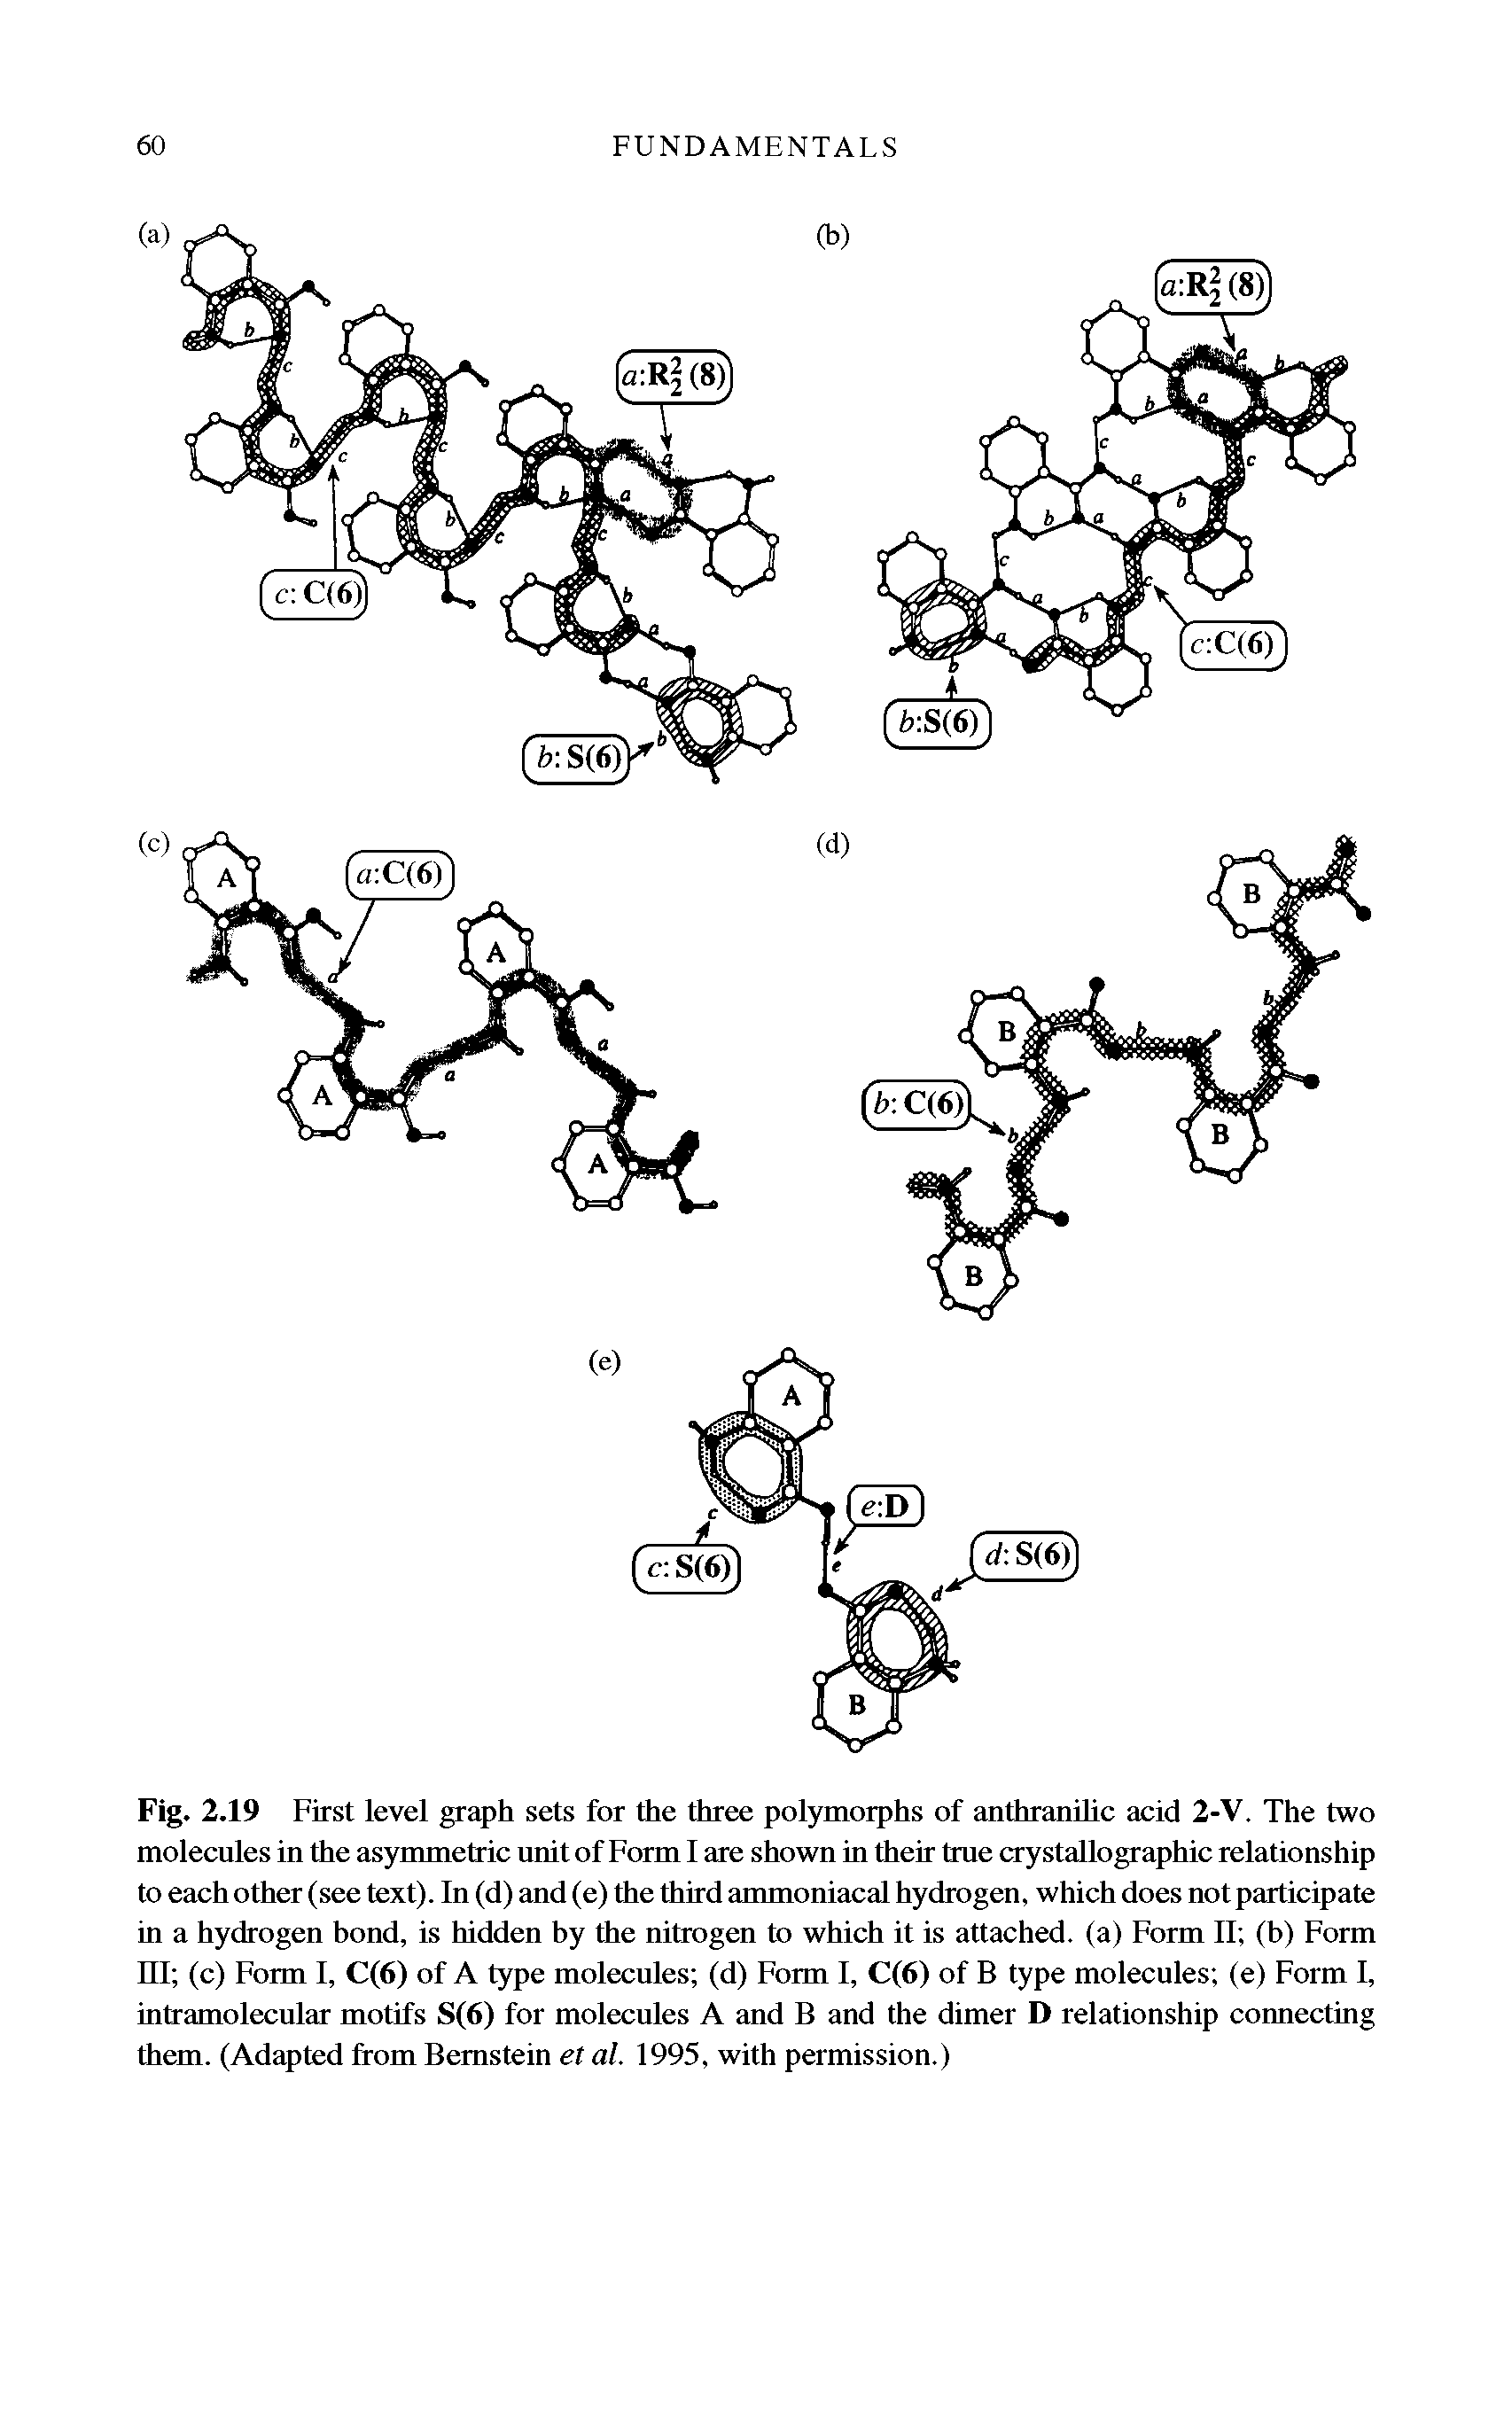 Fig. 2.19 First level graph sets for the three polymorphs of anthranrhc acid 2-V. The two molecules in the asymmetric unit of Form 1 are shown in their true crystallographic relationship to each other (see text). In (d) and (e) the third ammoniacal hydrogen, which does not participate in a hydrogen bond, is hidden hy the nitrogen to which it is attached, (a) Form II (b) Form ni (c) Form I, C(6) of A type molecnles (d) Form I, C(6) of B type molecules (e) Form I, intramolecular motifs S(6) for molecules A and B and the dimer D relationship connecting them. (Adapted from Bernstein et al. 1995, with permission.)...